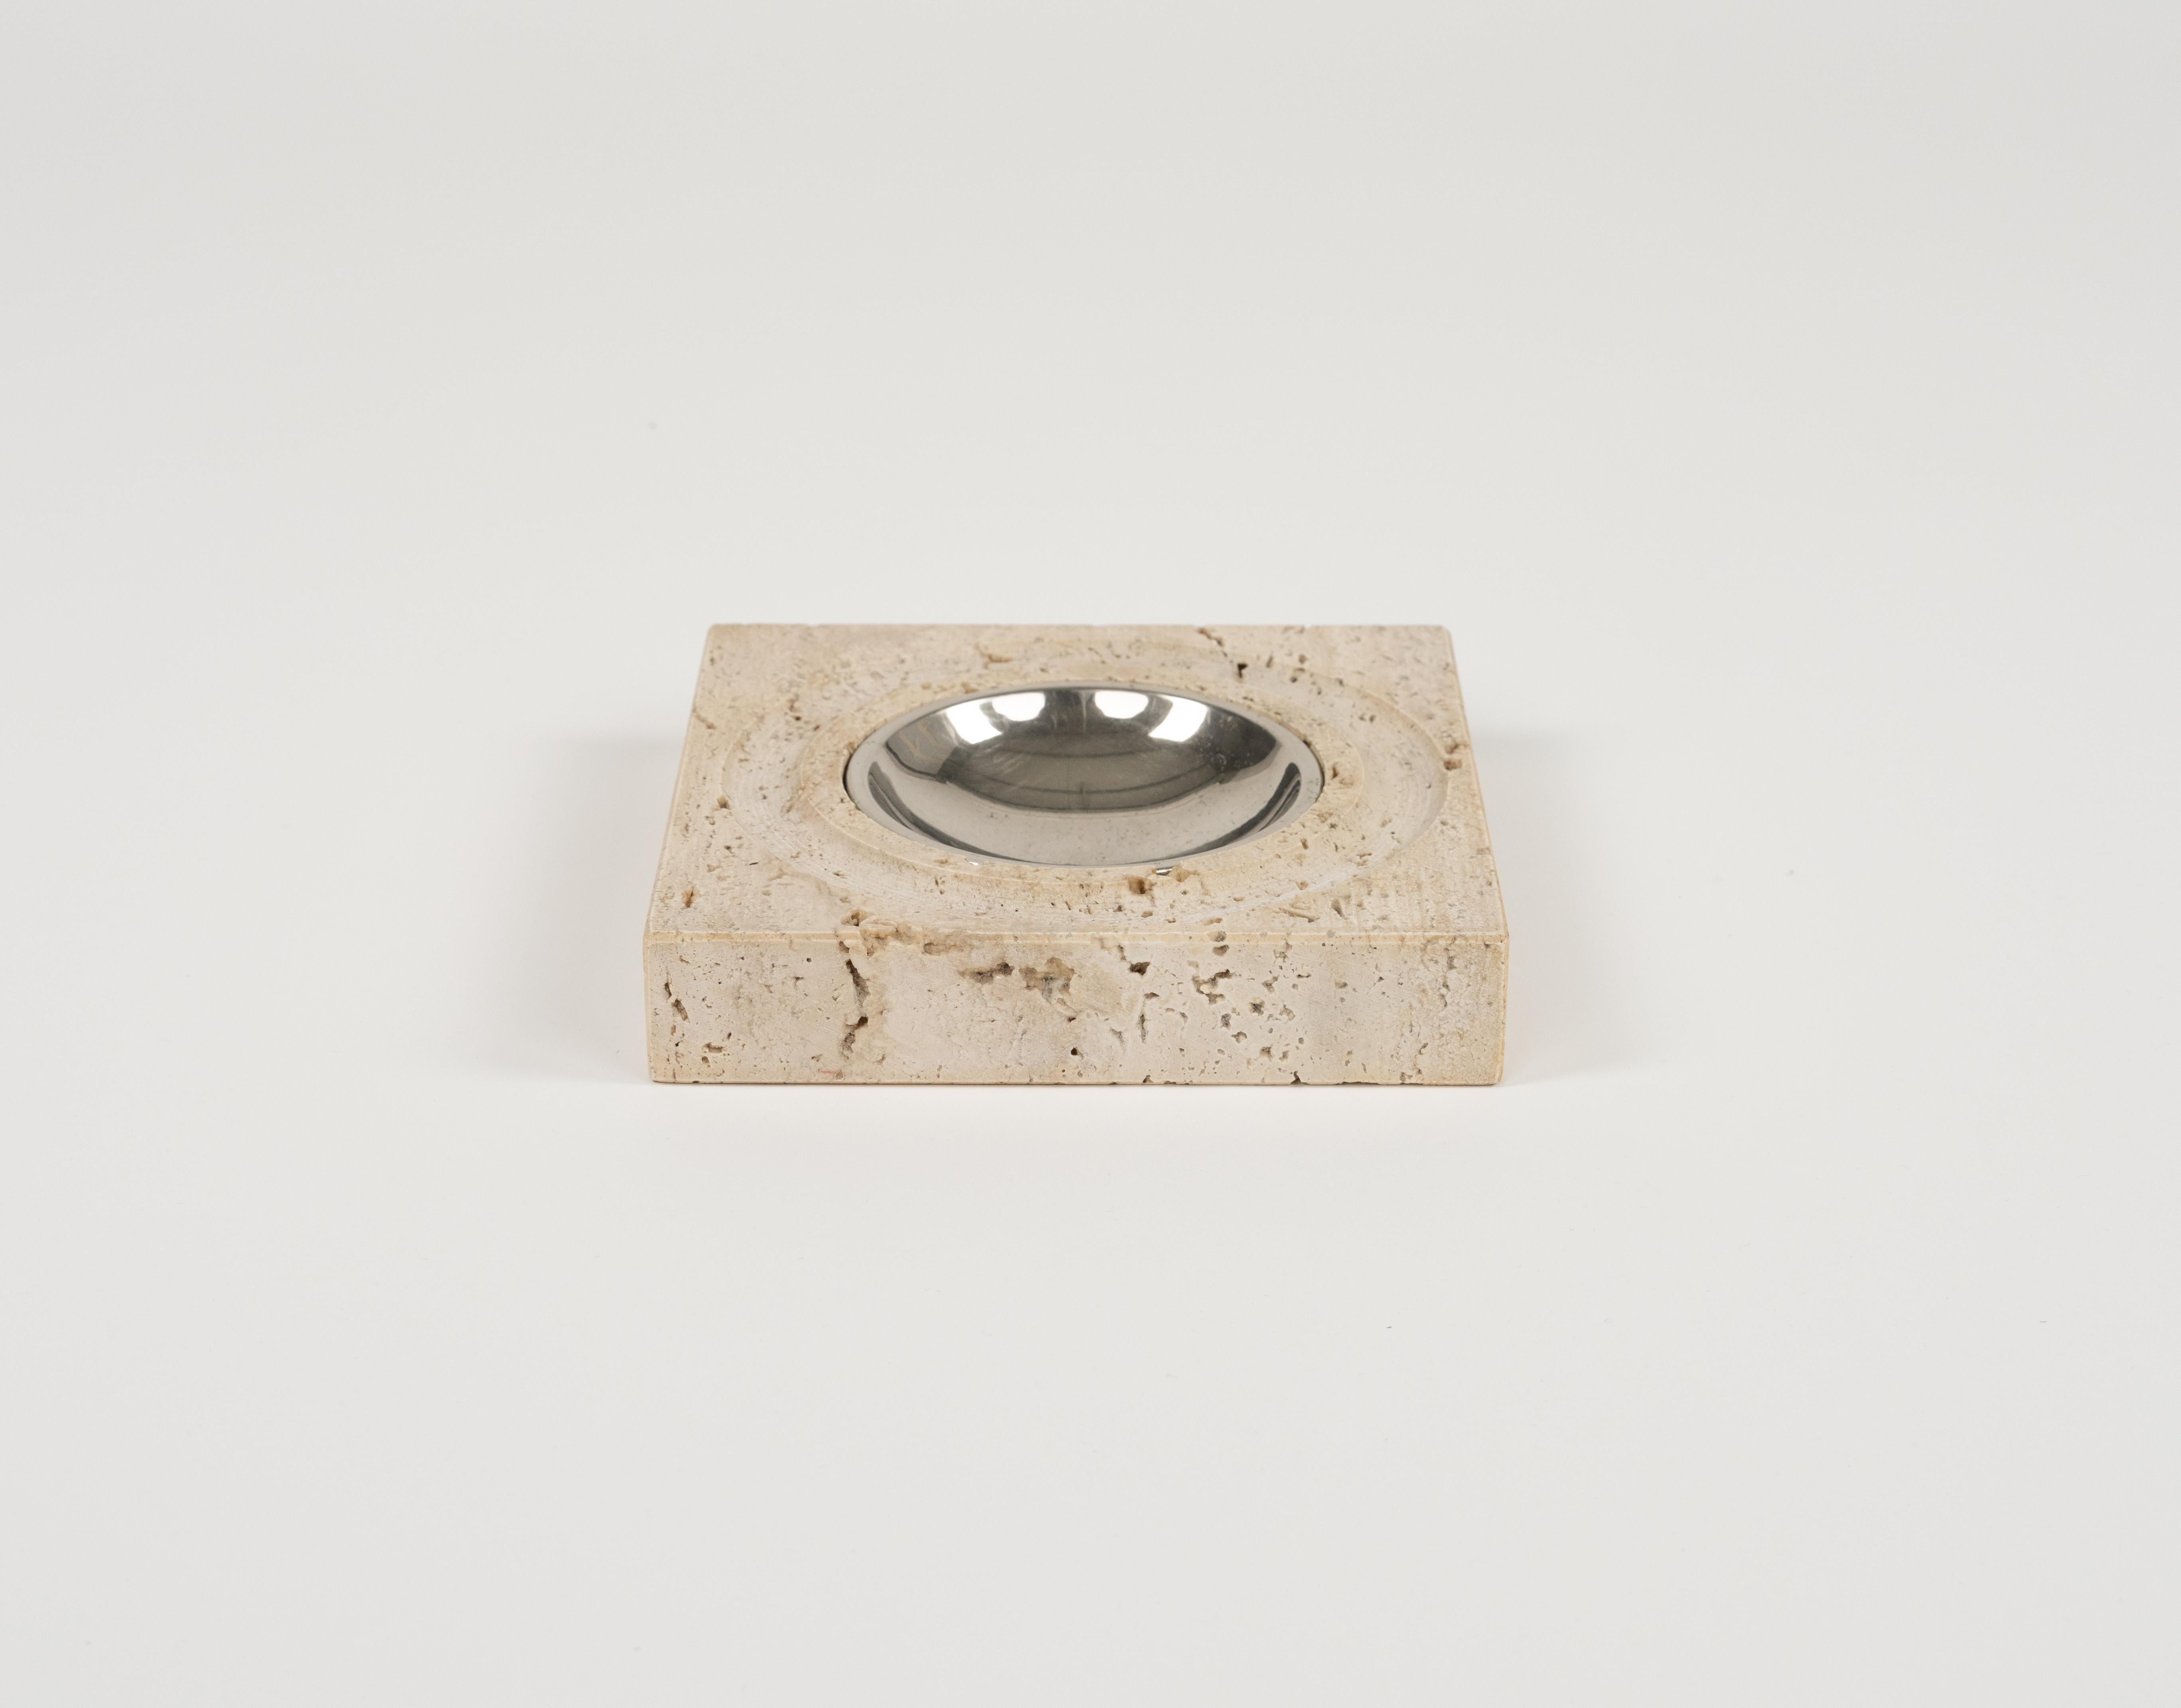 Steel Midcentury Travertine Ashtray or Vide-Poche by Fratelli Mannelli, Italy 1970s For Sale